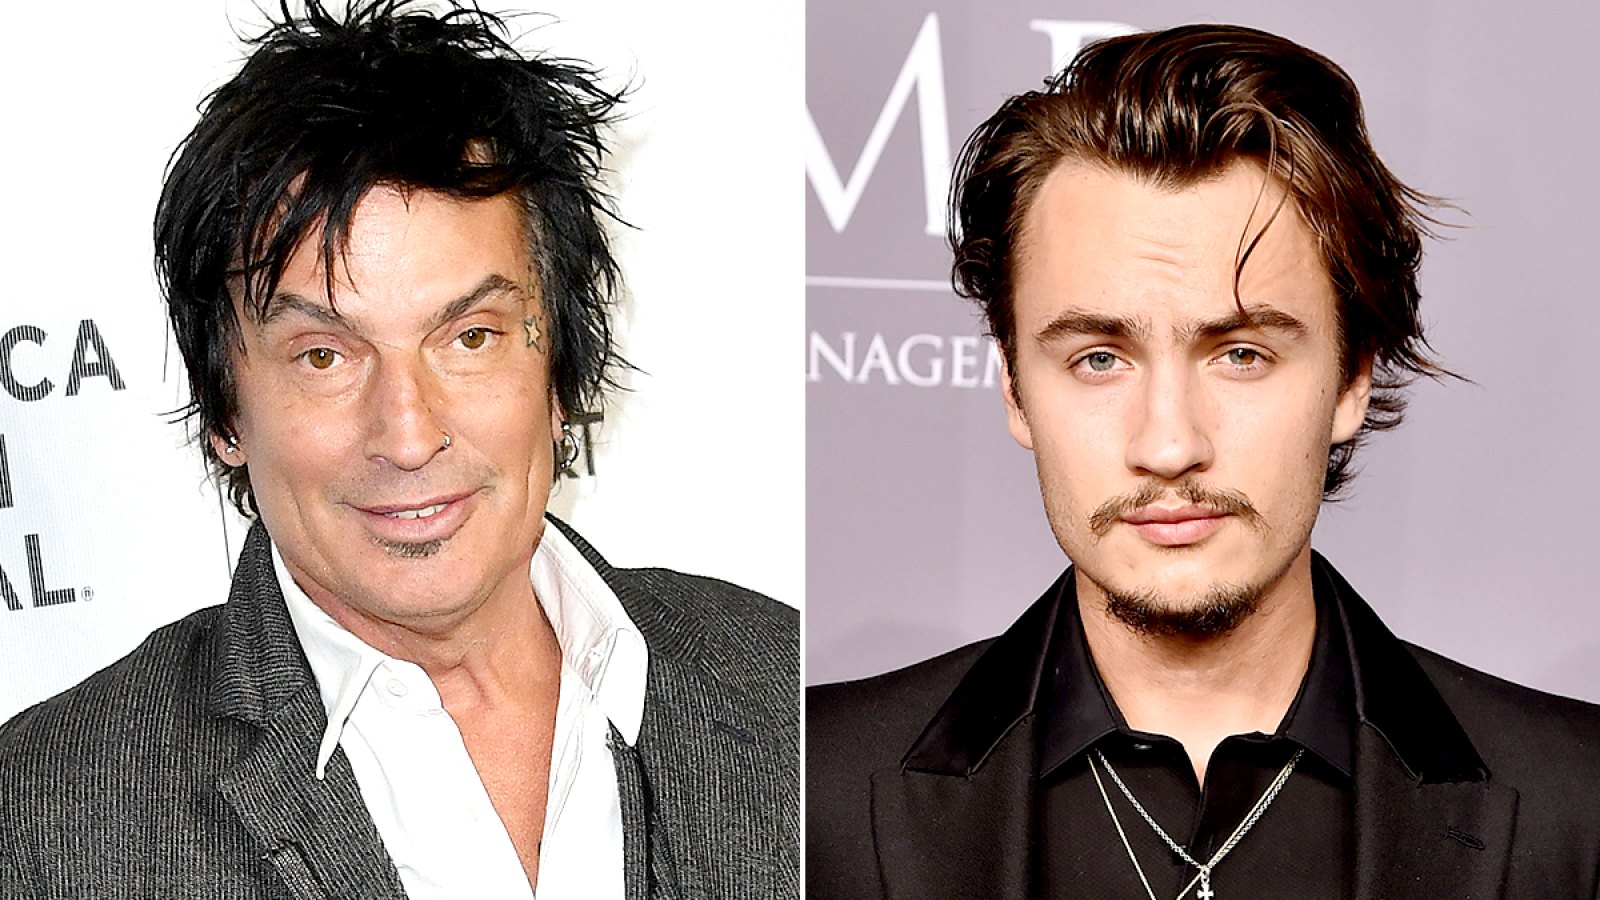 Tommy Lee's Son Posts Video of Rocker Seemingly Unconscious